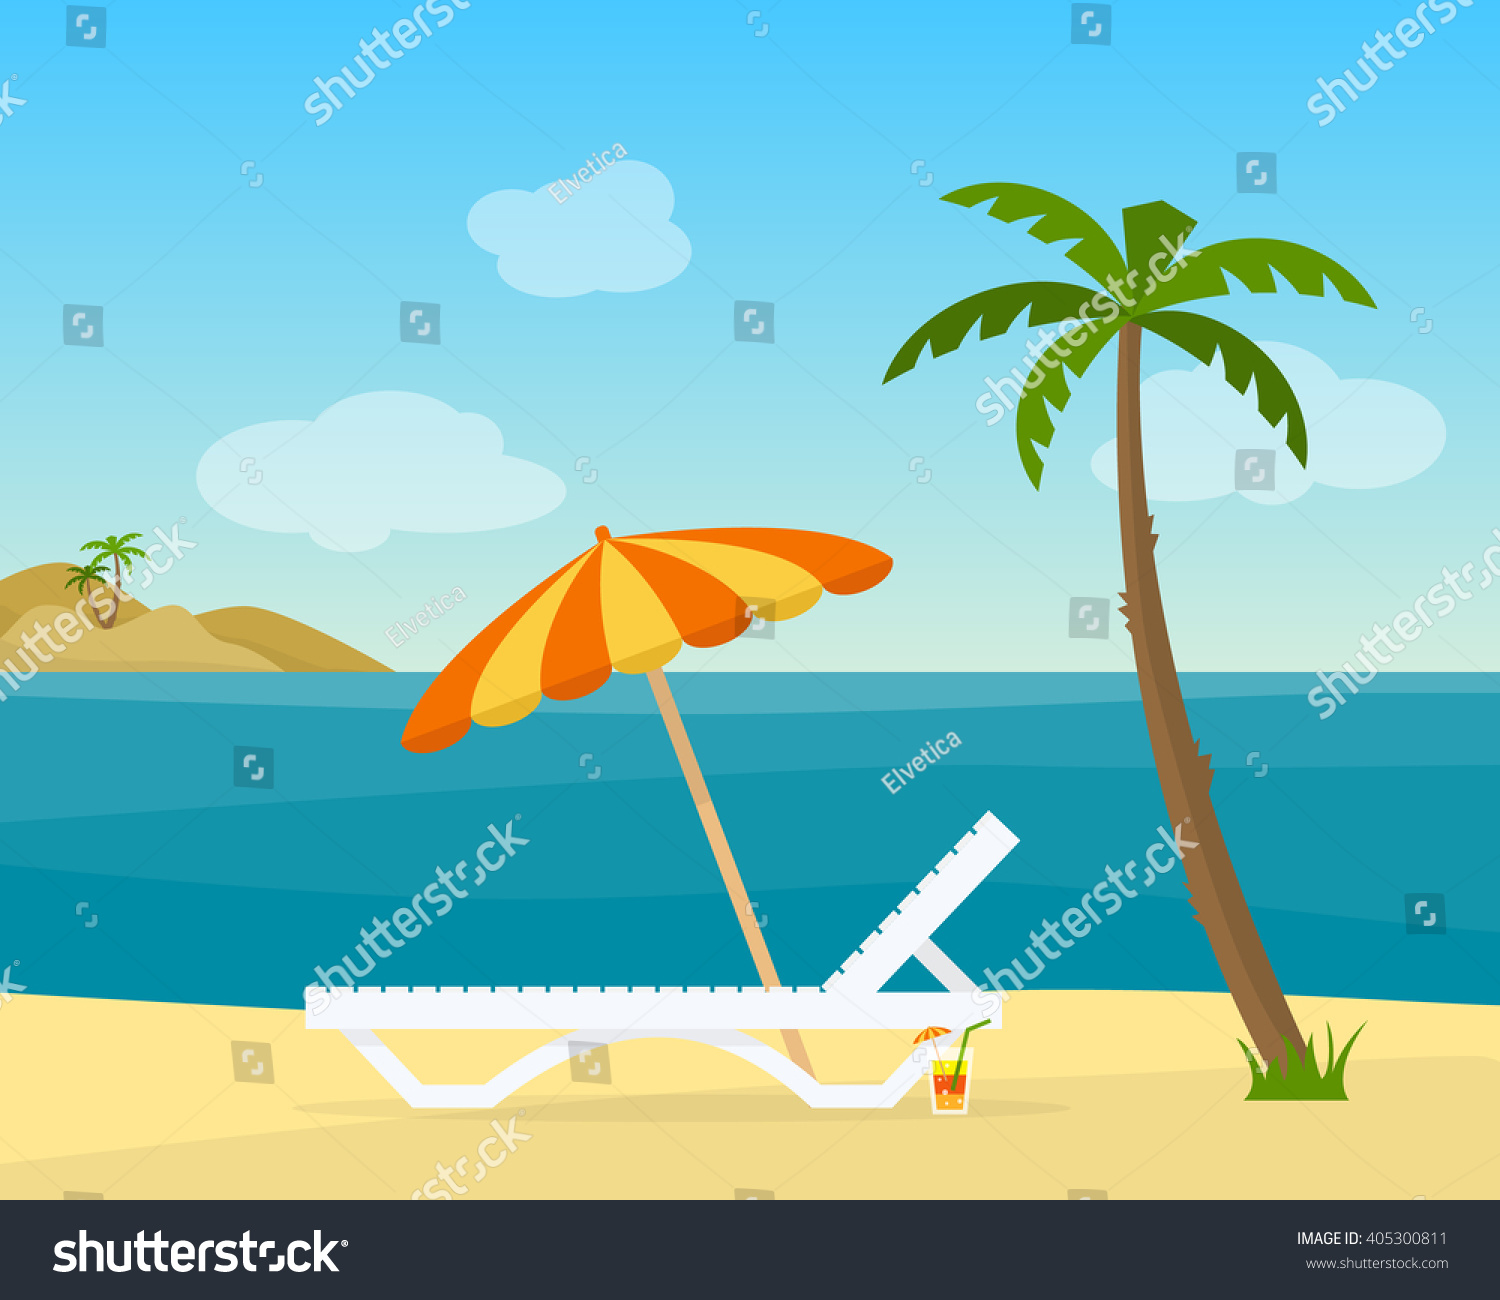 Lounge On The Beach Under A Palm Tree. Beach Chair With Sea On Tropical ...